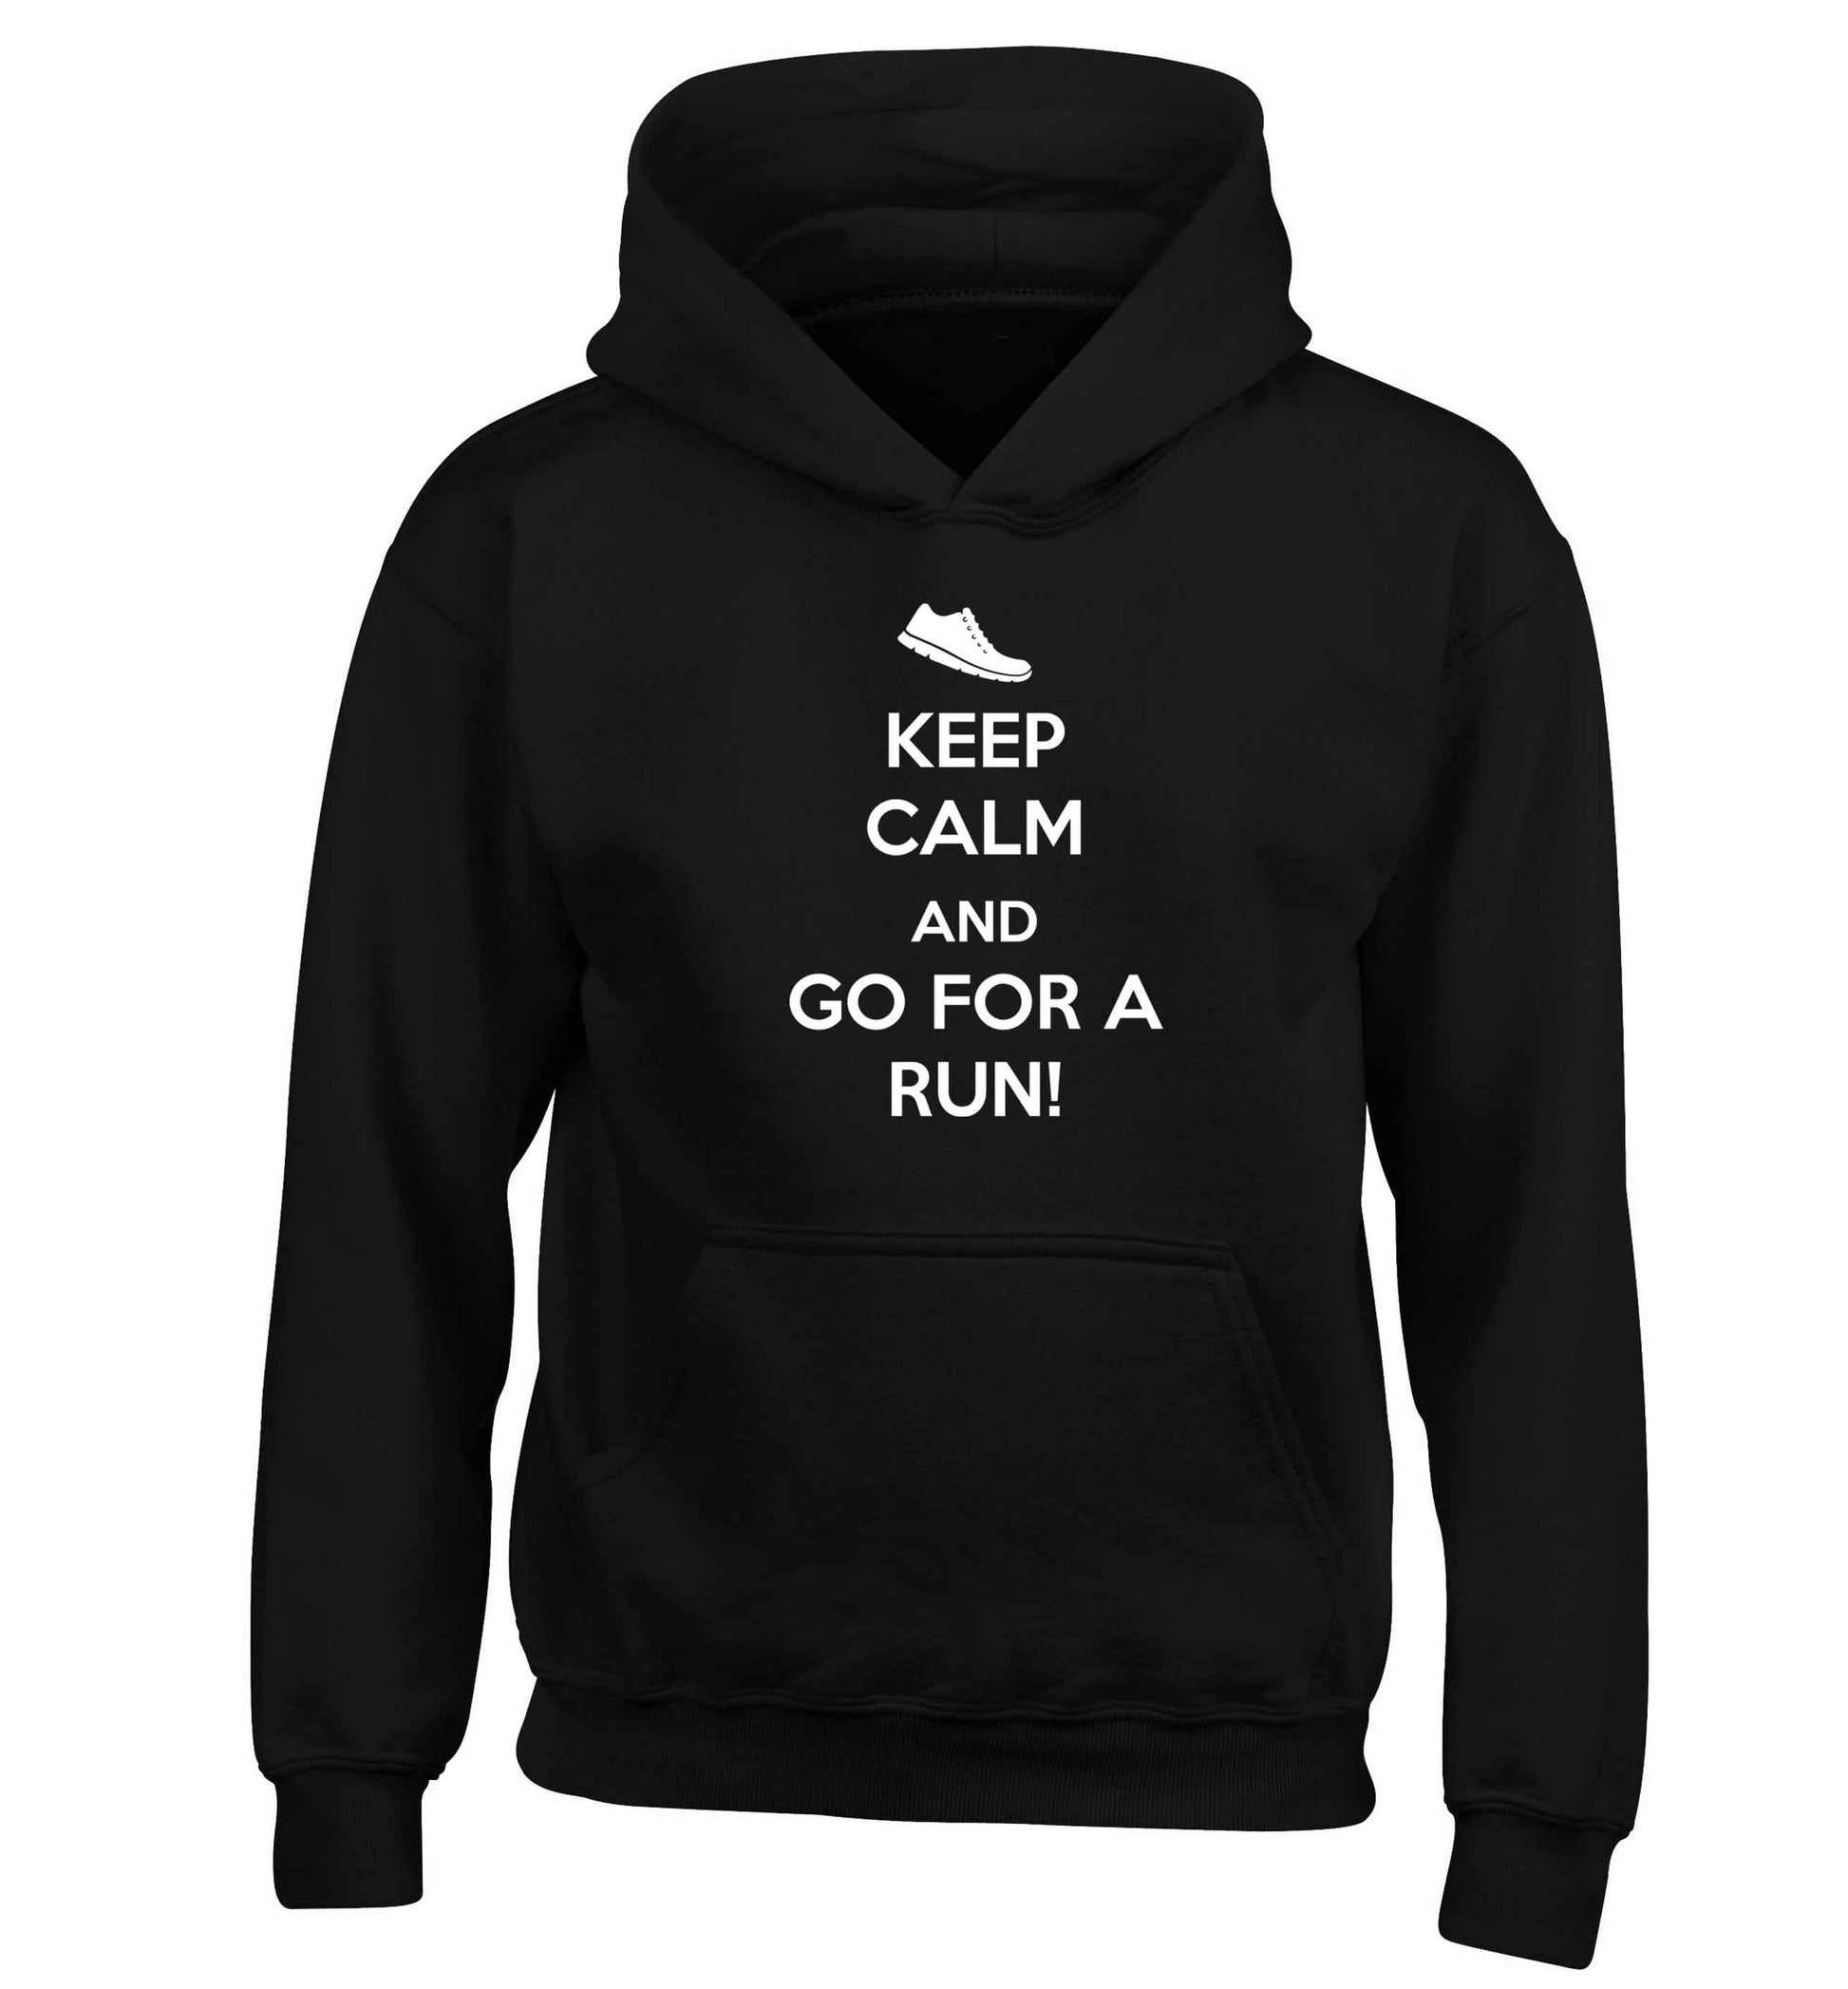 Keep calm and go for a run children's black hoodie 12-13 Years